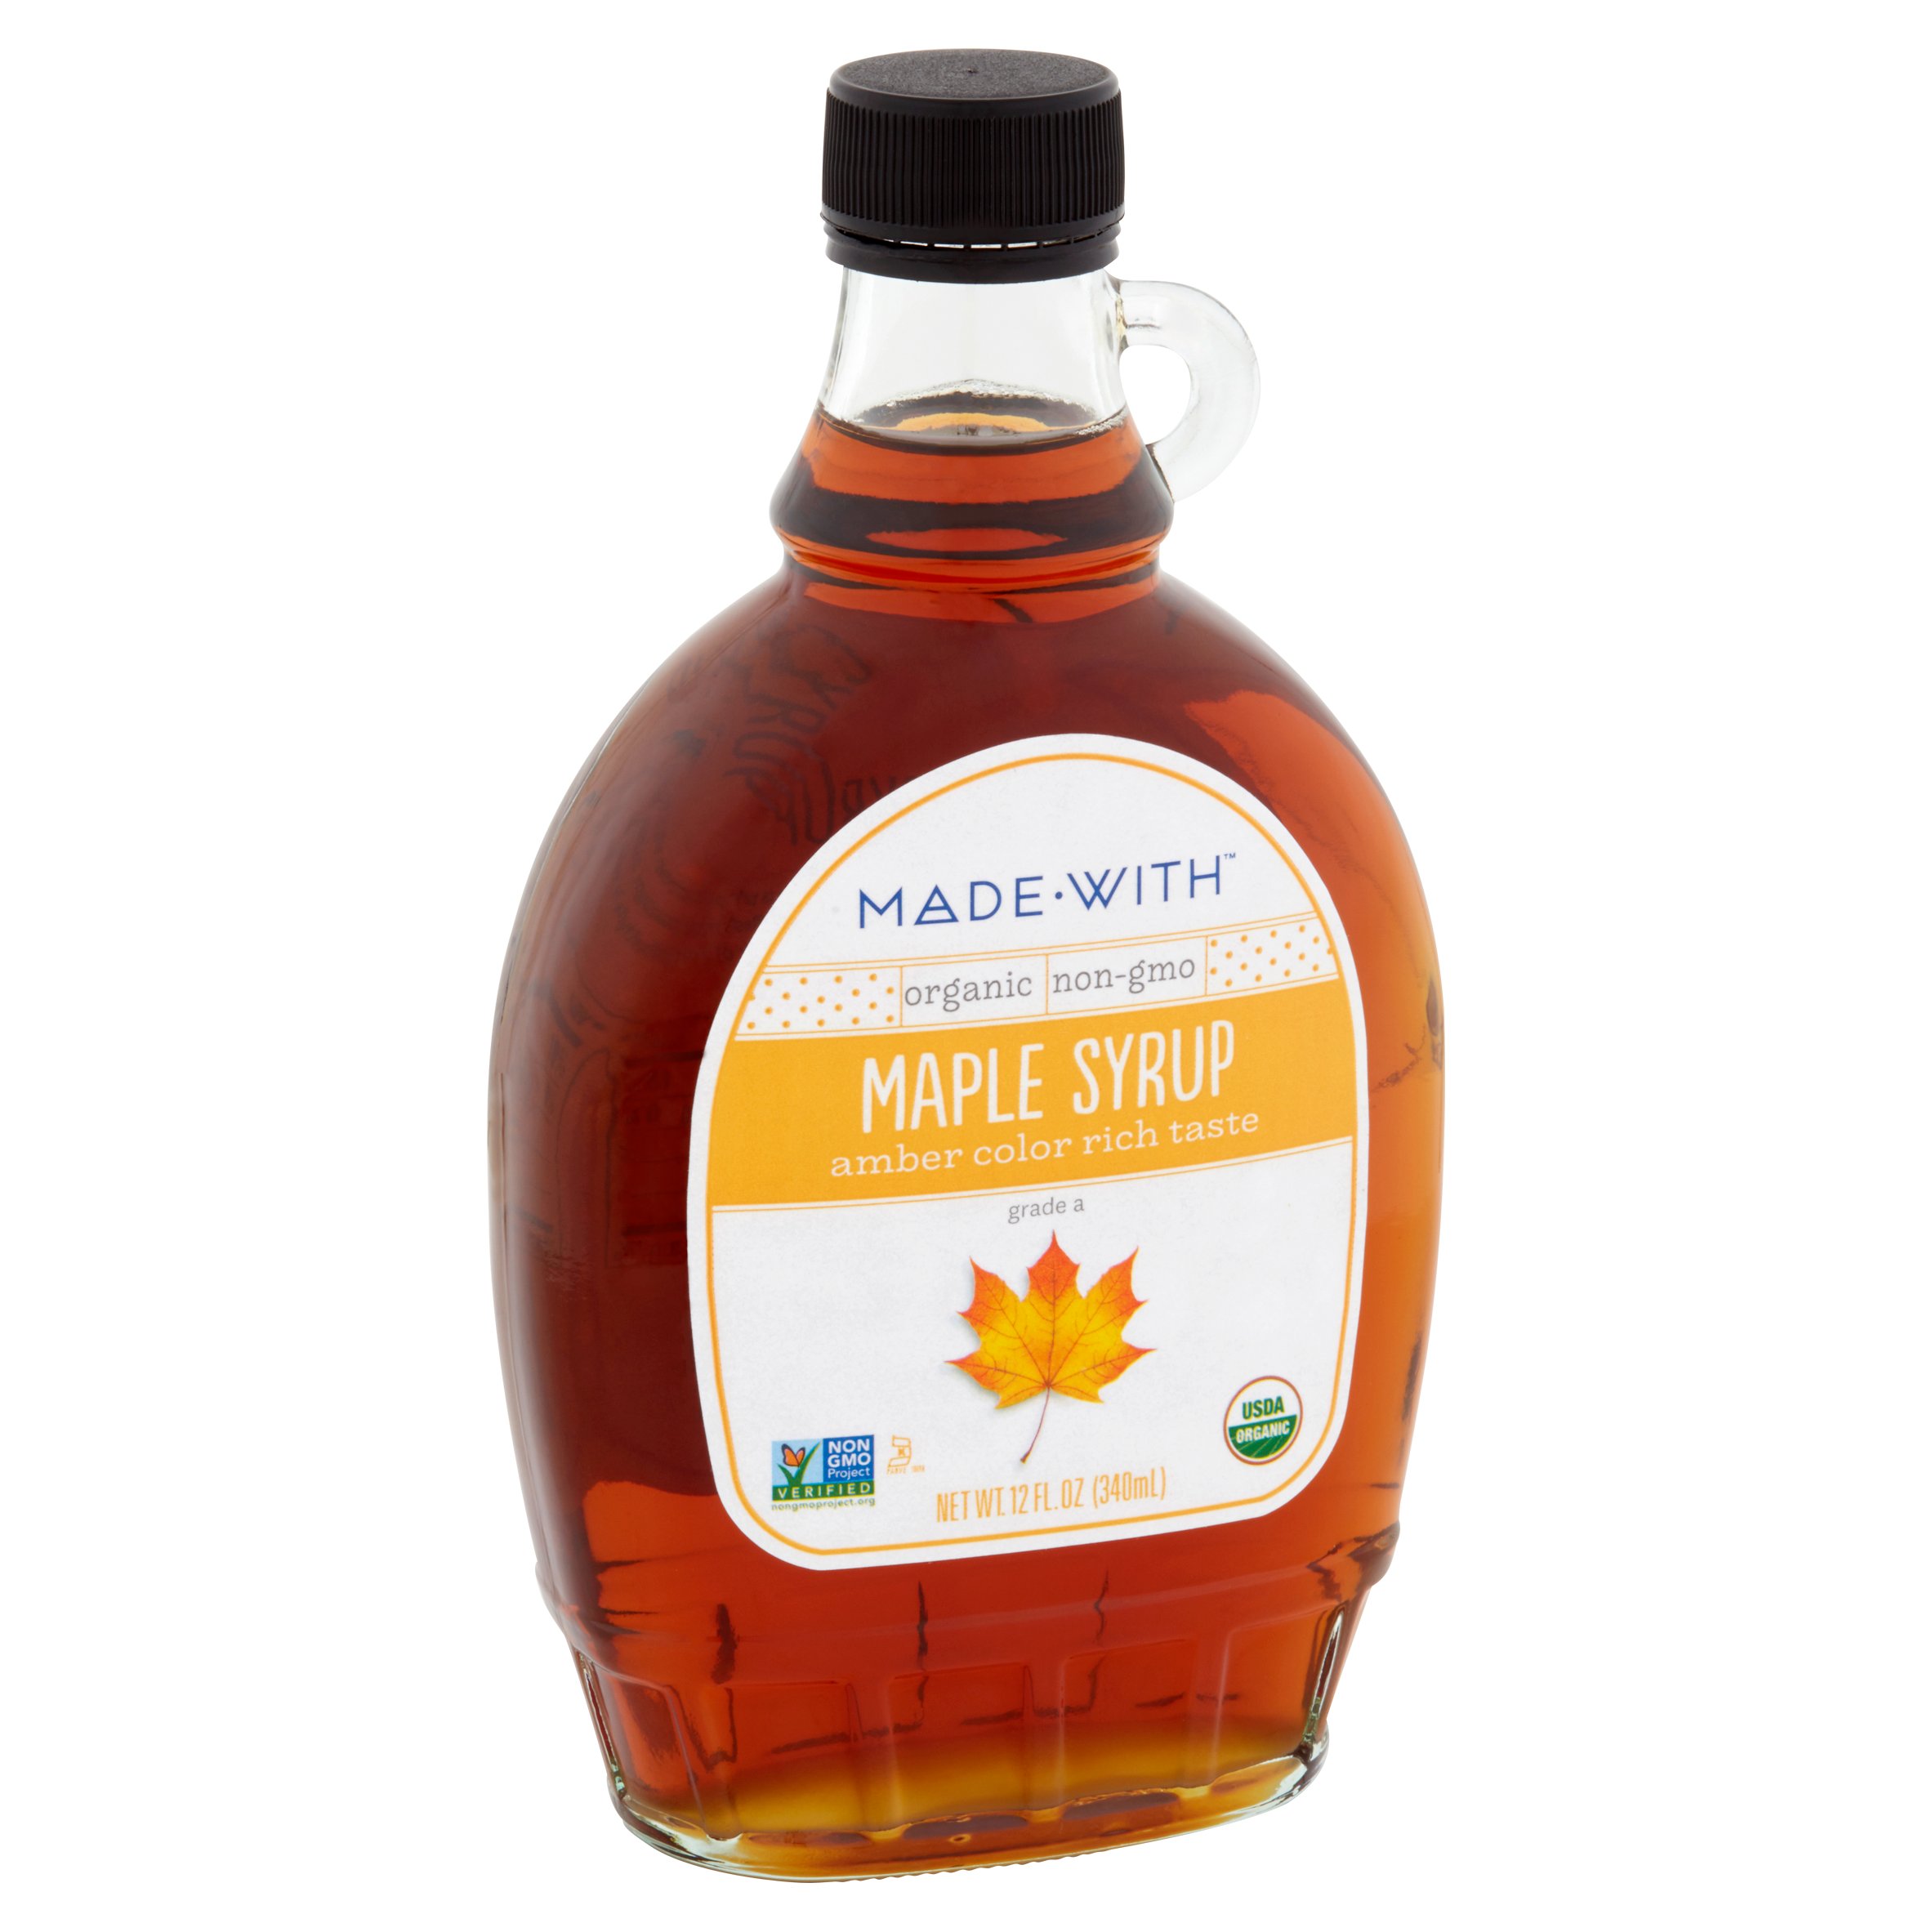 Made With Syrup Maple Grd A Ambr Org,12 Fo (Pack Of 12) - image 2 of 4